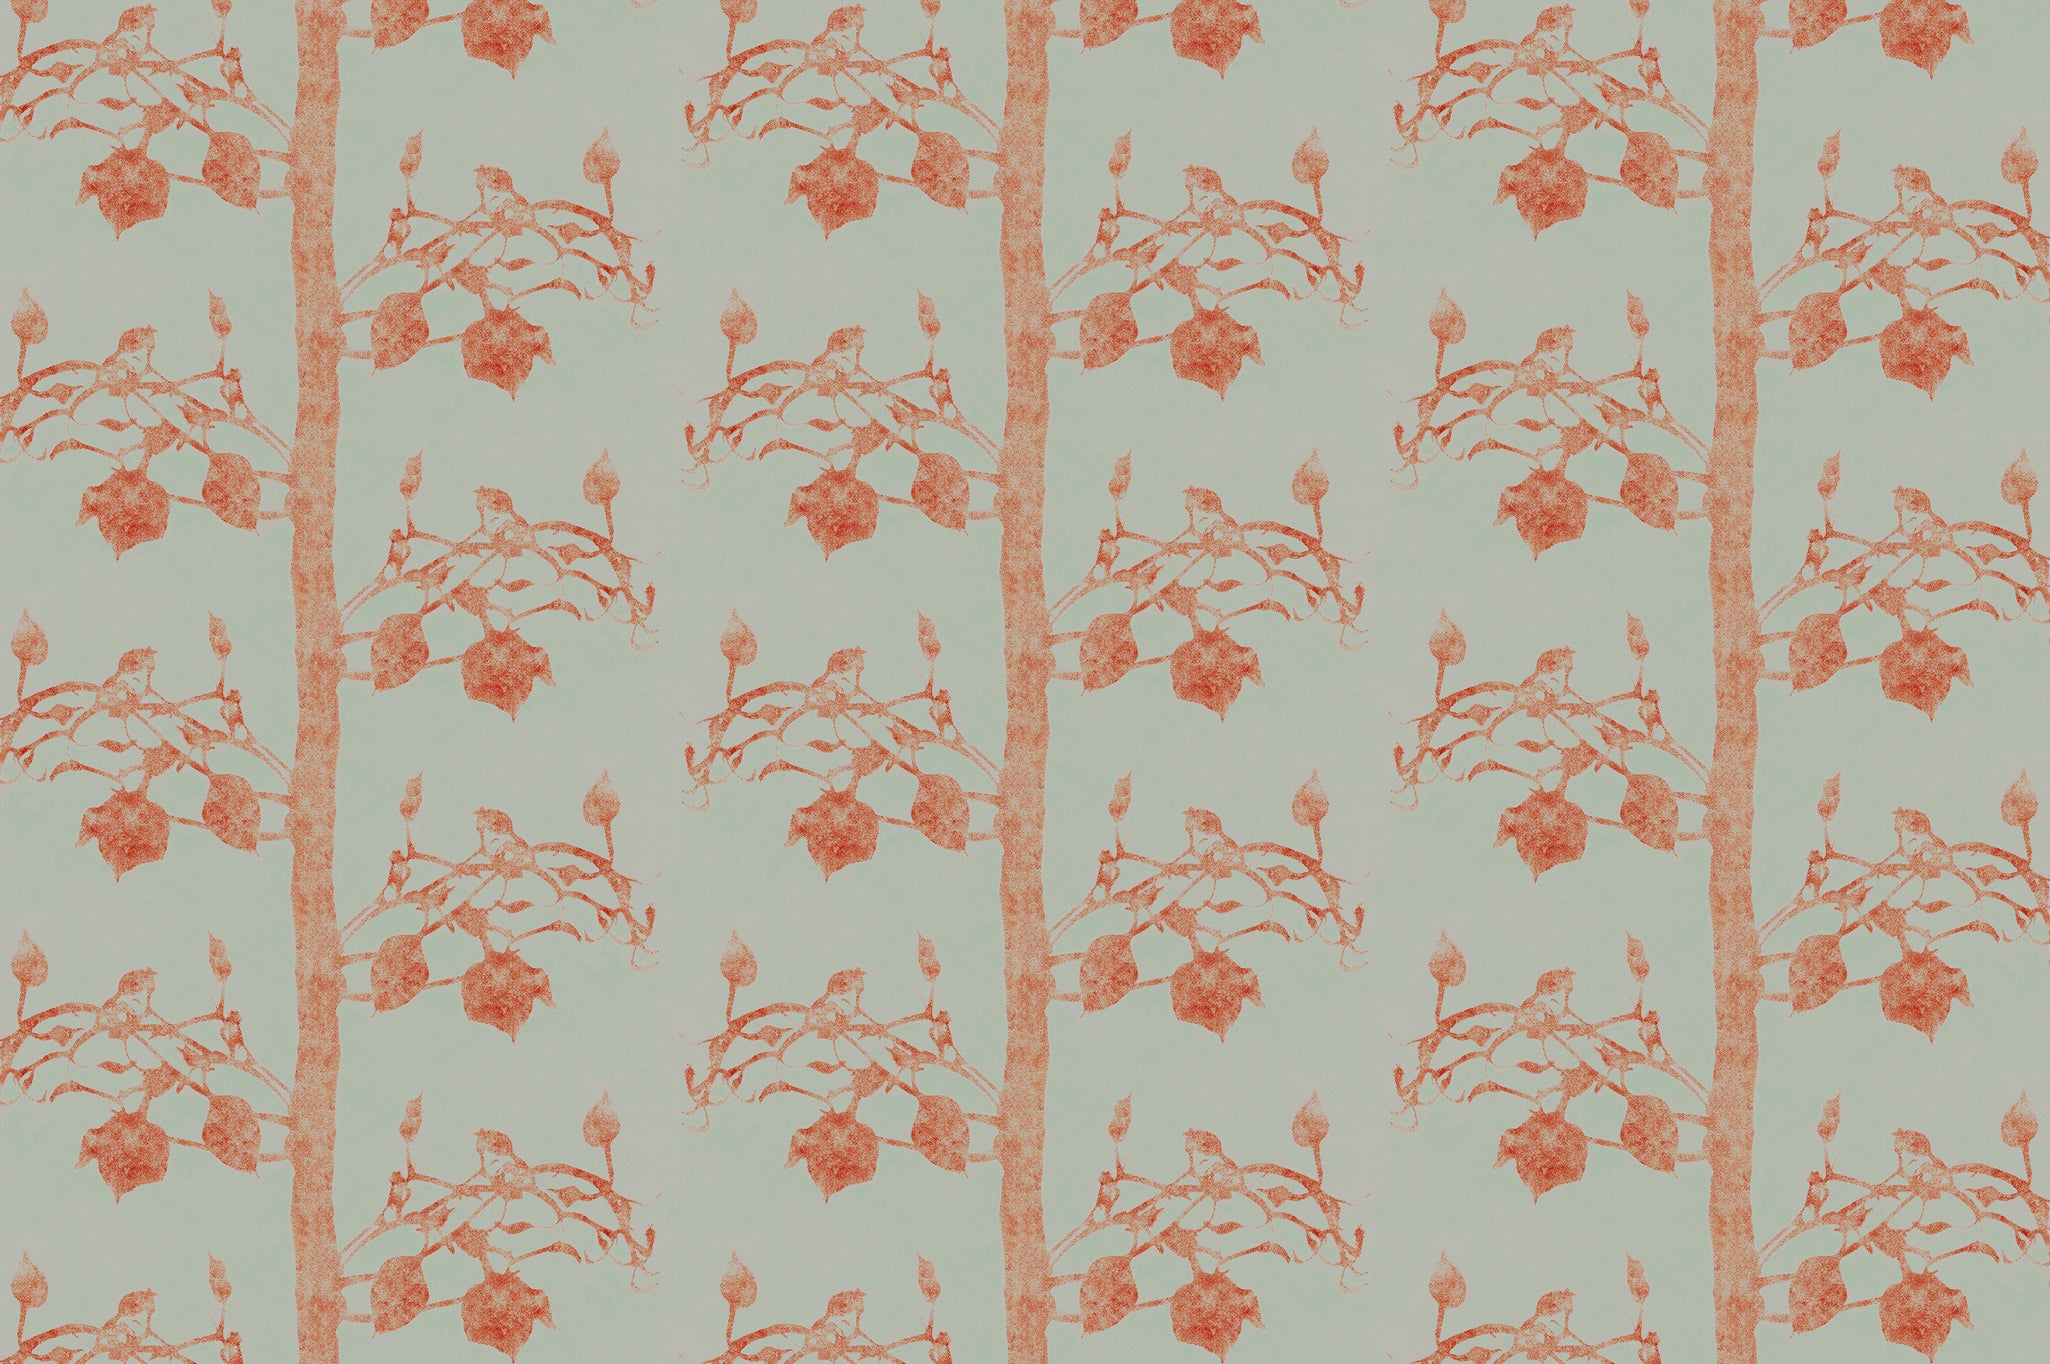 Detail of wallpaper in a linear tree and leaf print in burnt orange on a light green field.